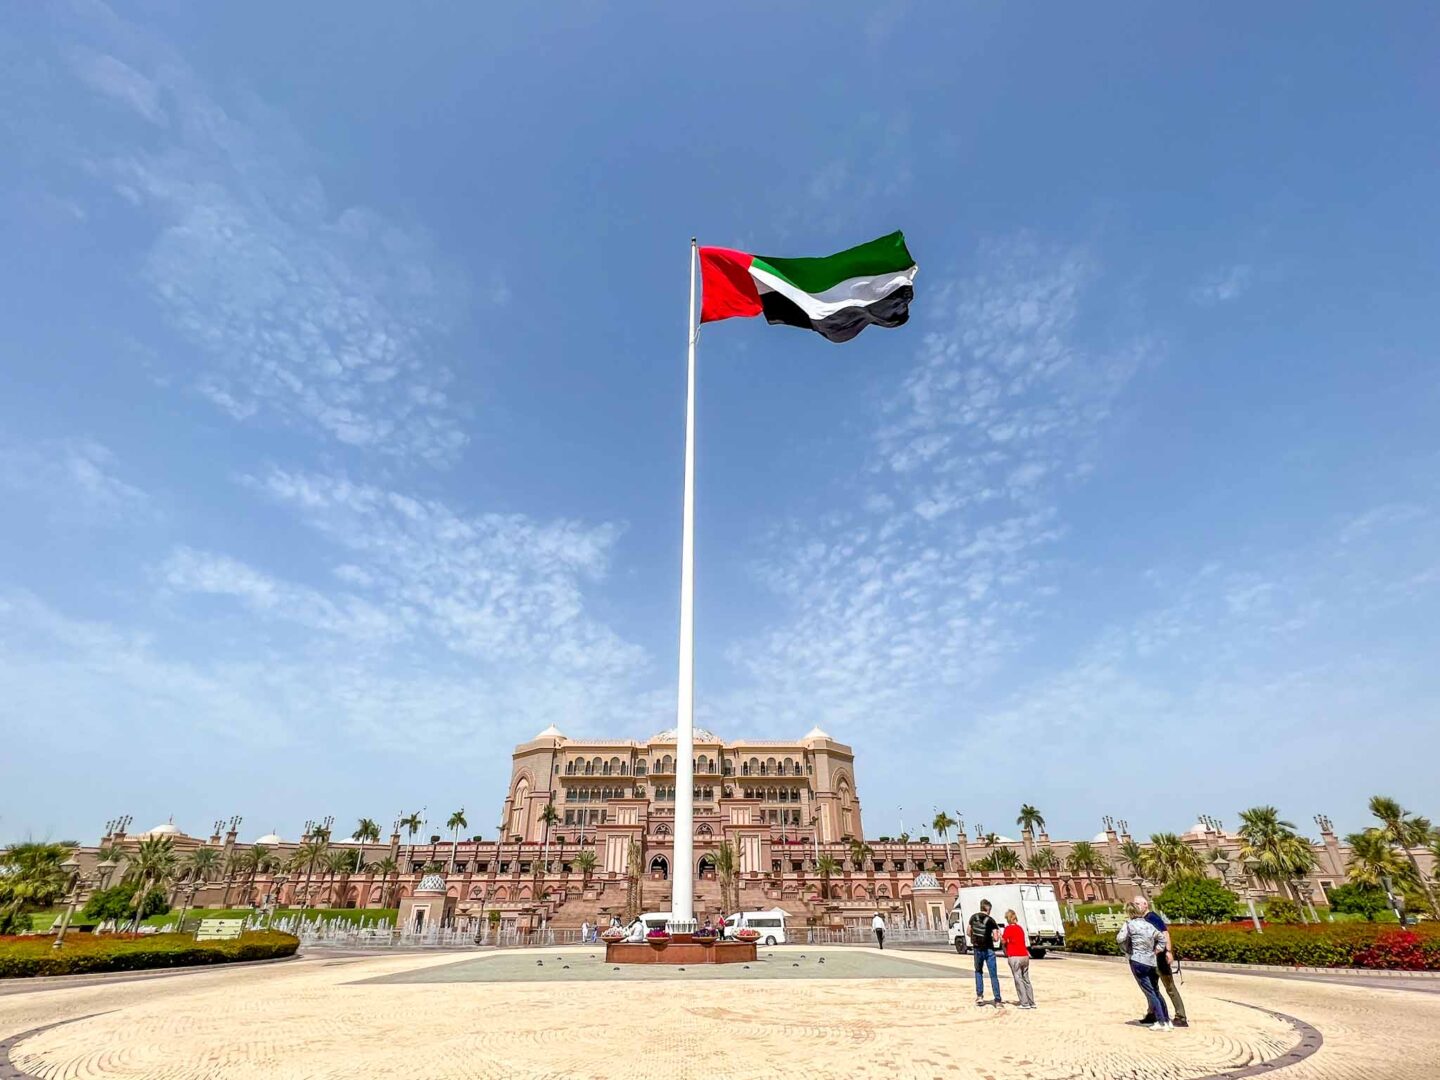 Things to do in Abu Dhabi, Emirates Palace from outside with flag